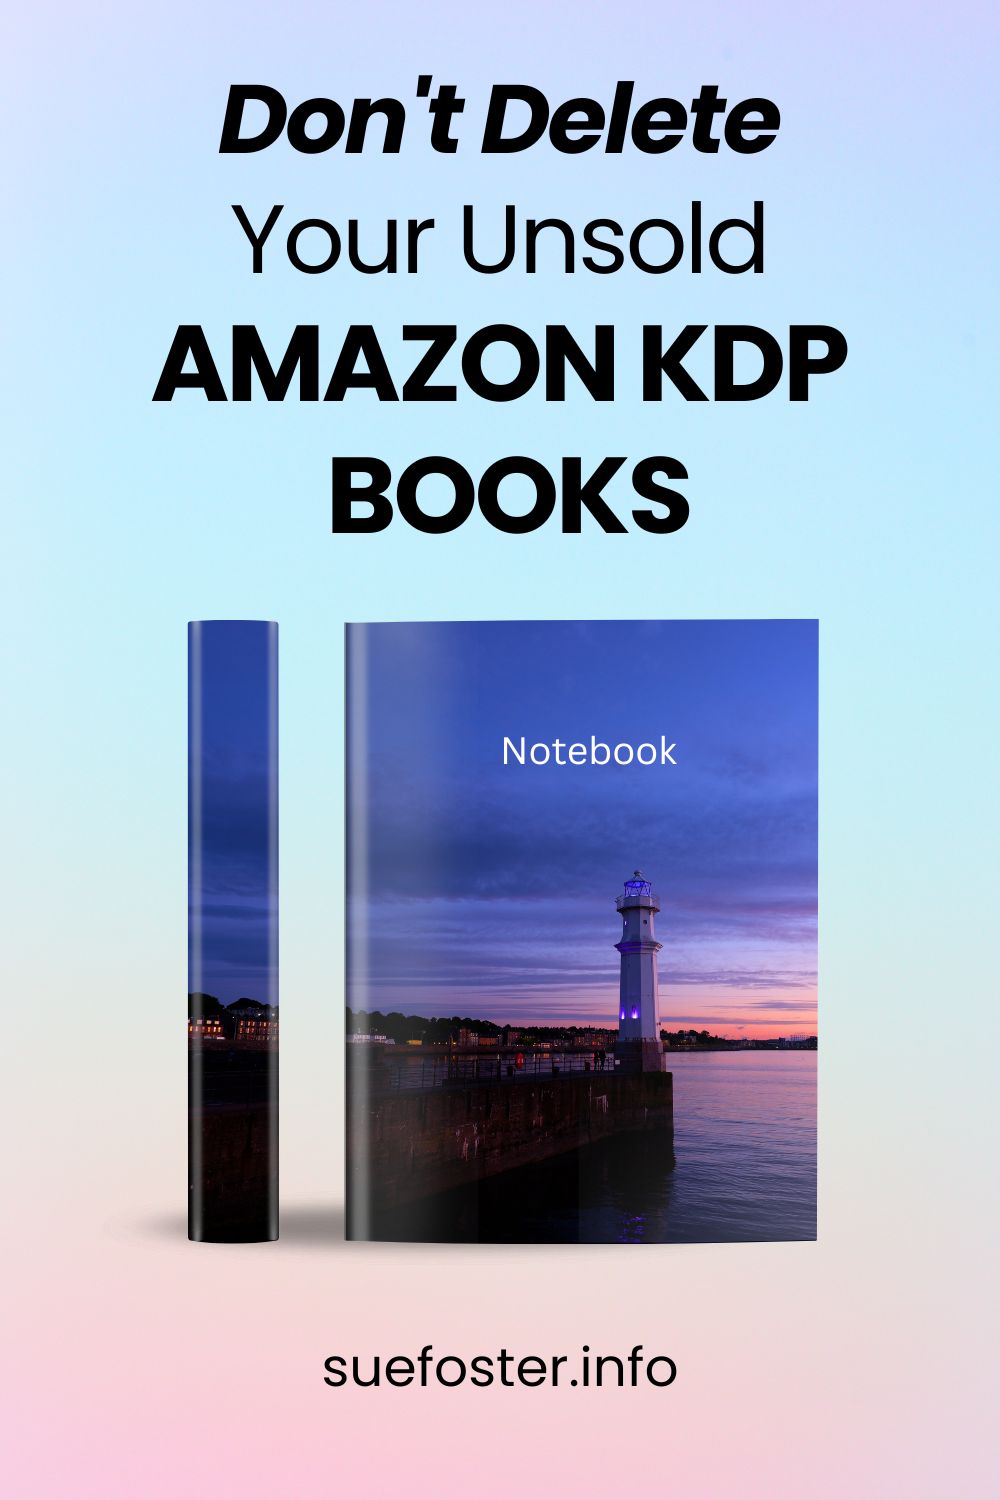 Discover why deleting your old, Amazon KDP books may not be the best idea. Explore repurposing opportunities, long-tail sales, and passive income potential. Keep publishing and maximize your book catalogue's value.